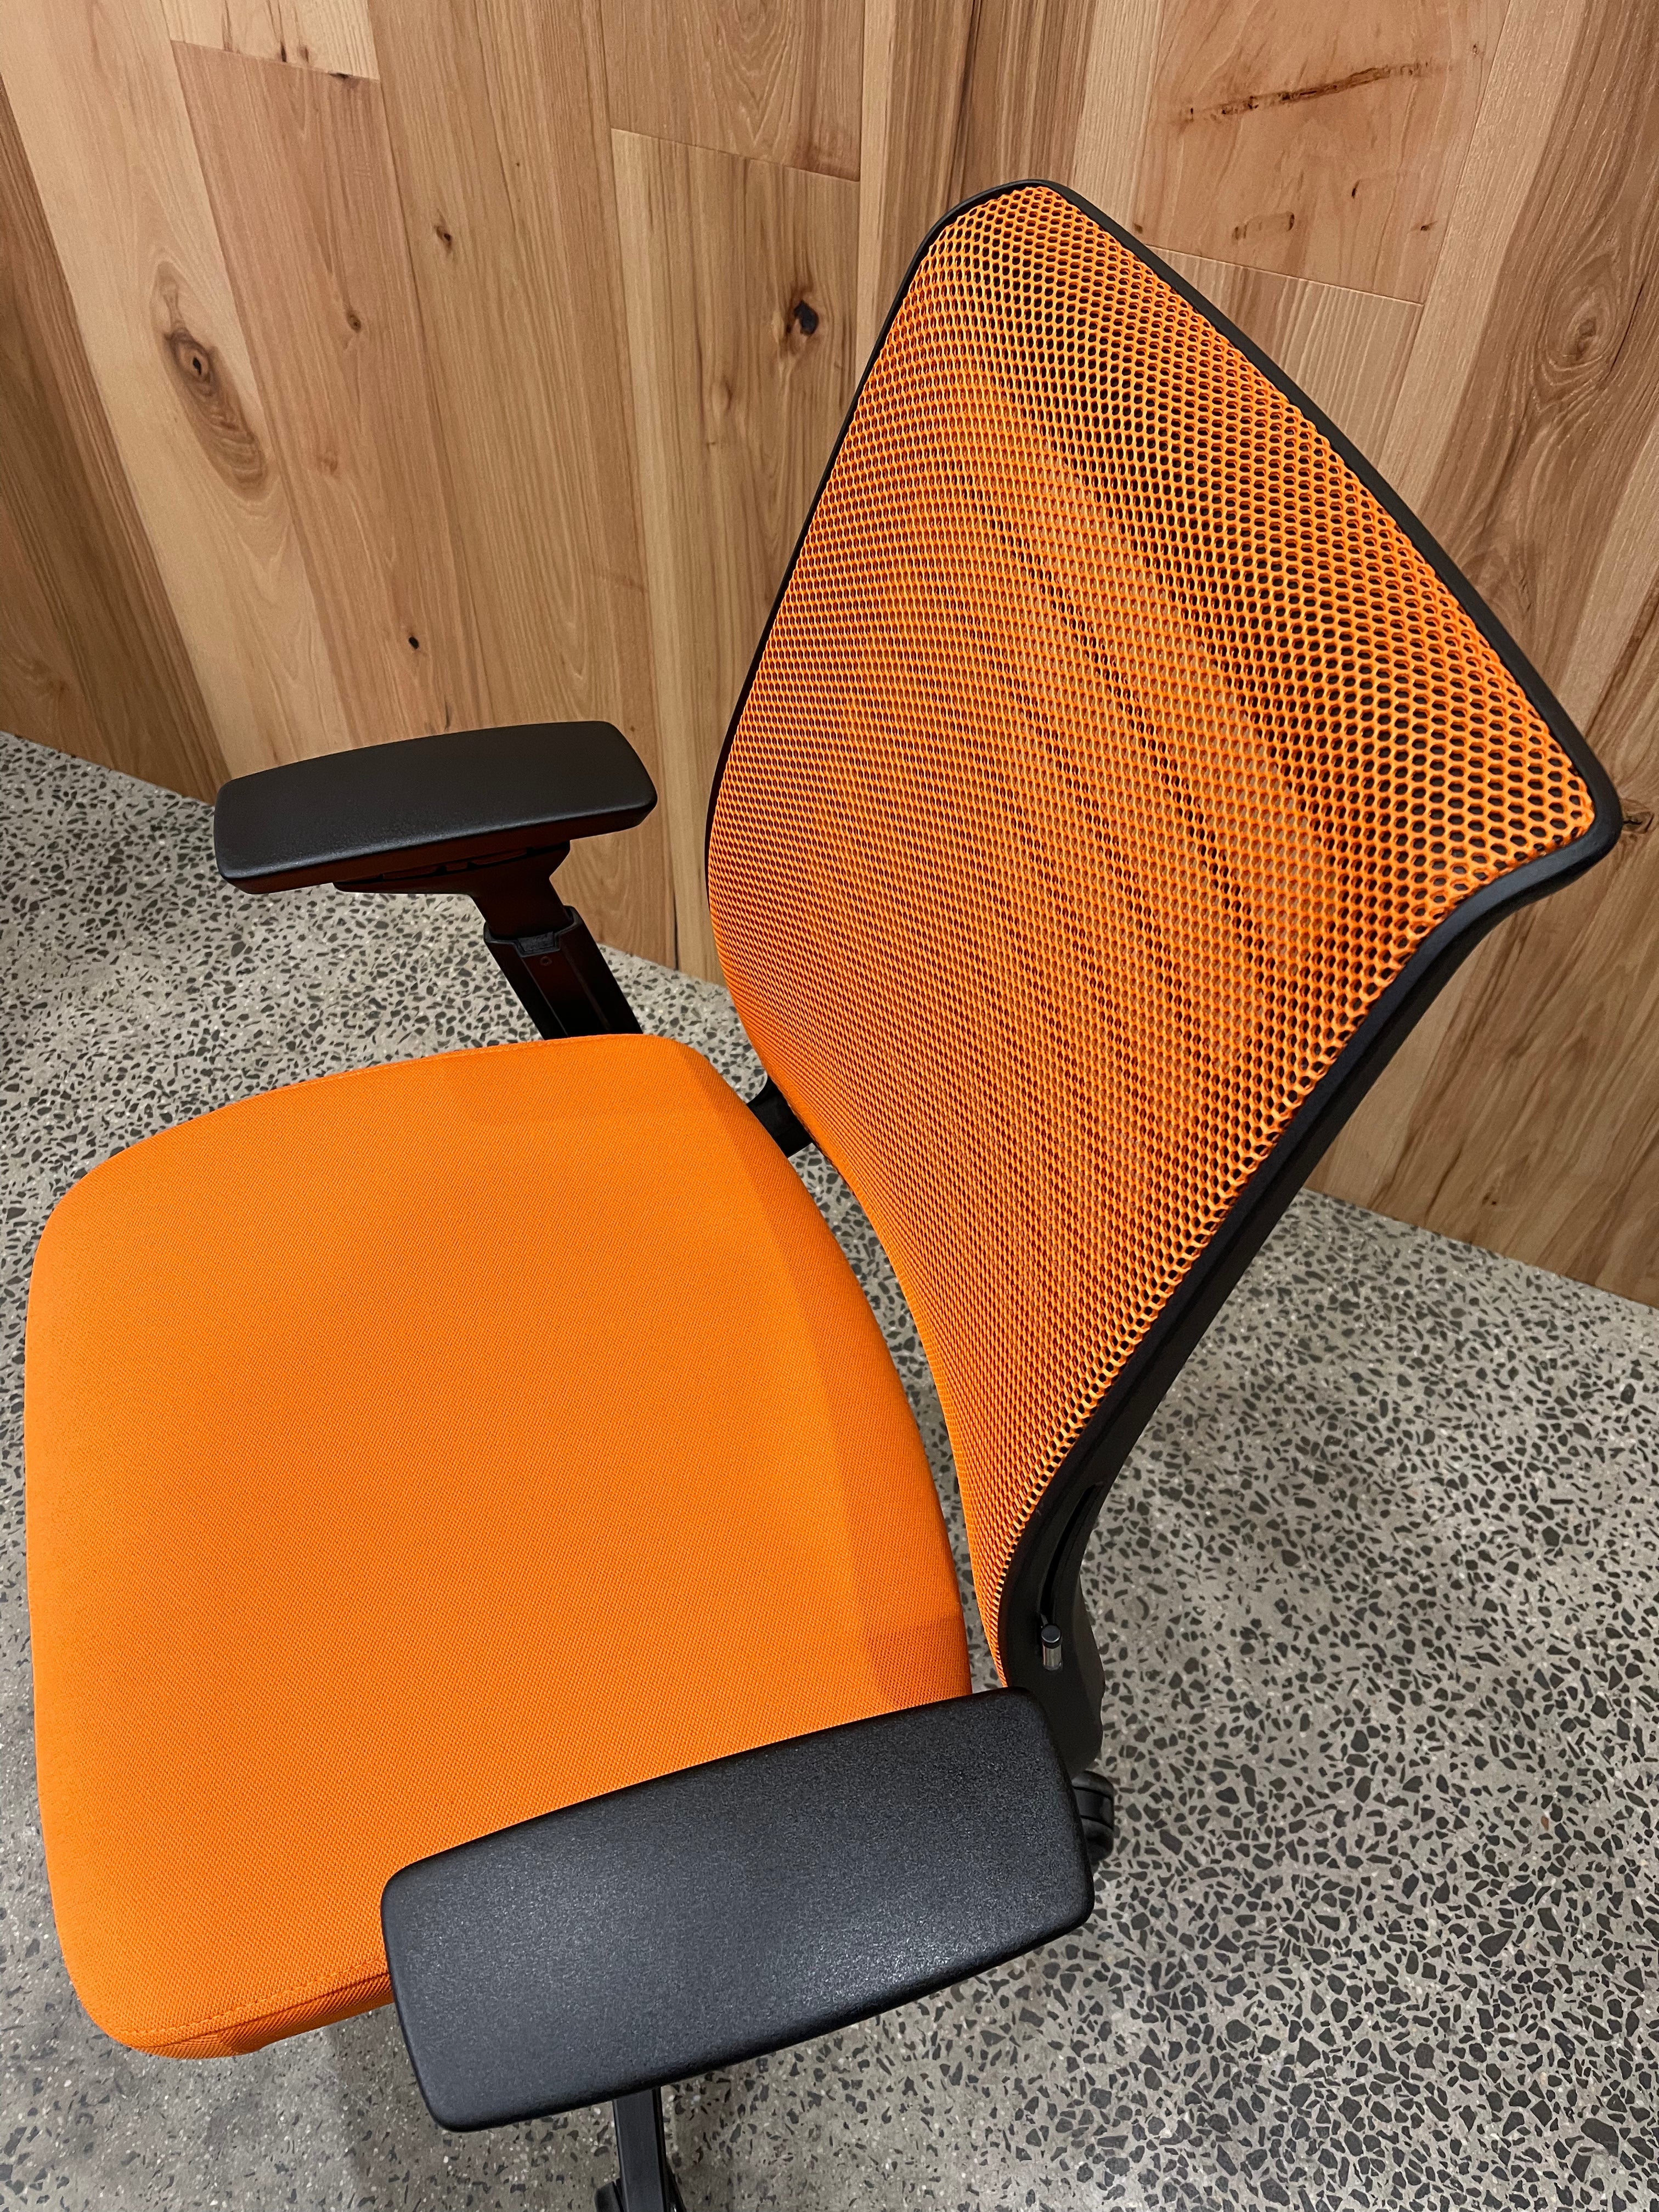 Steelcase Think 2 Chair